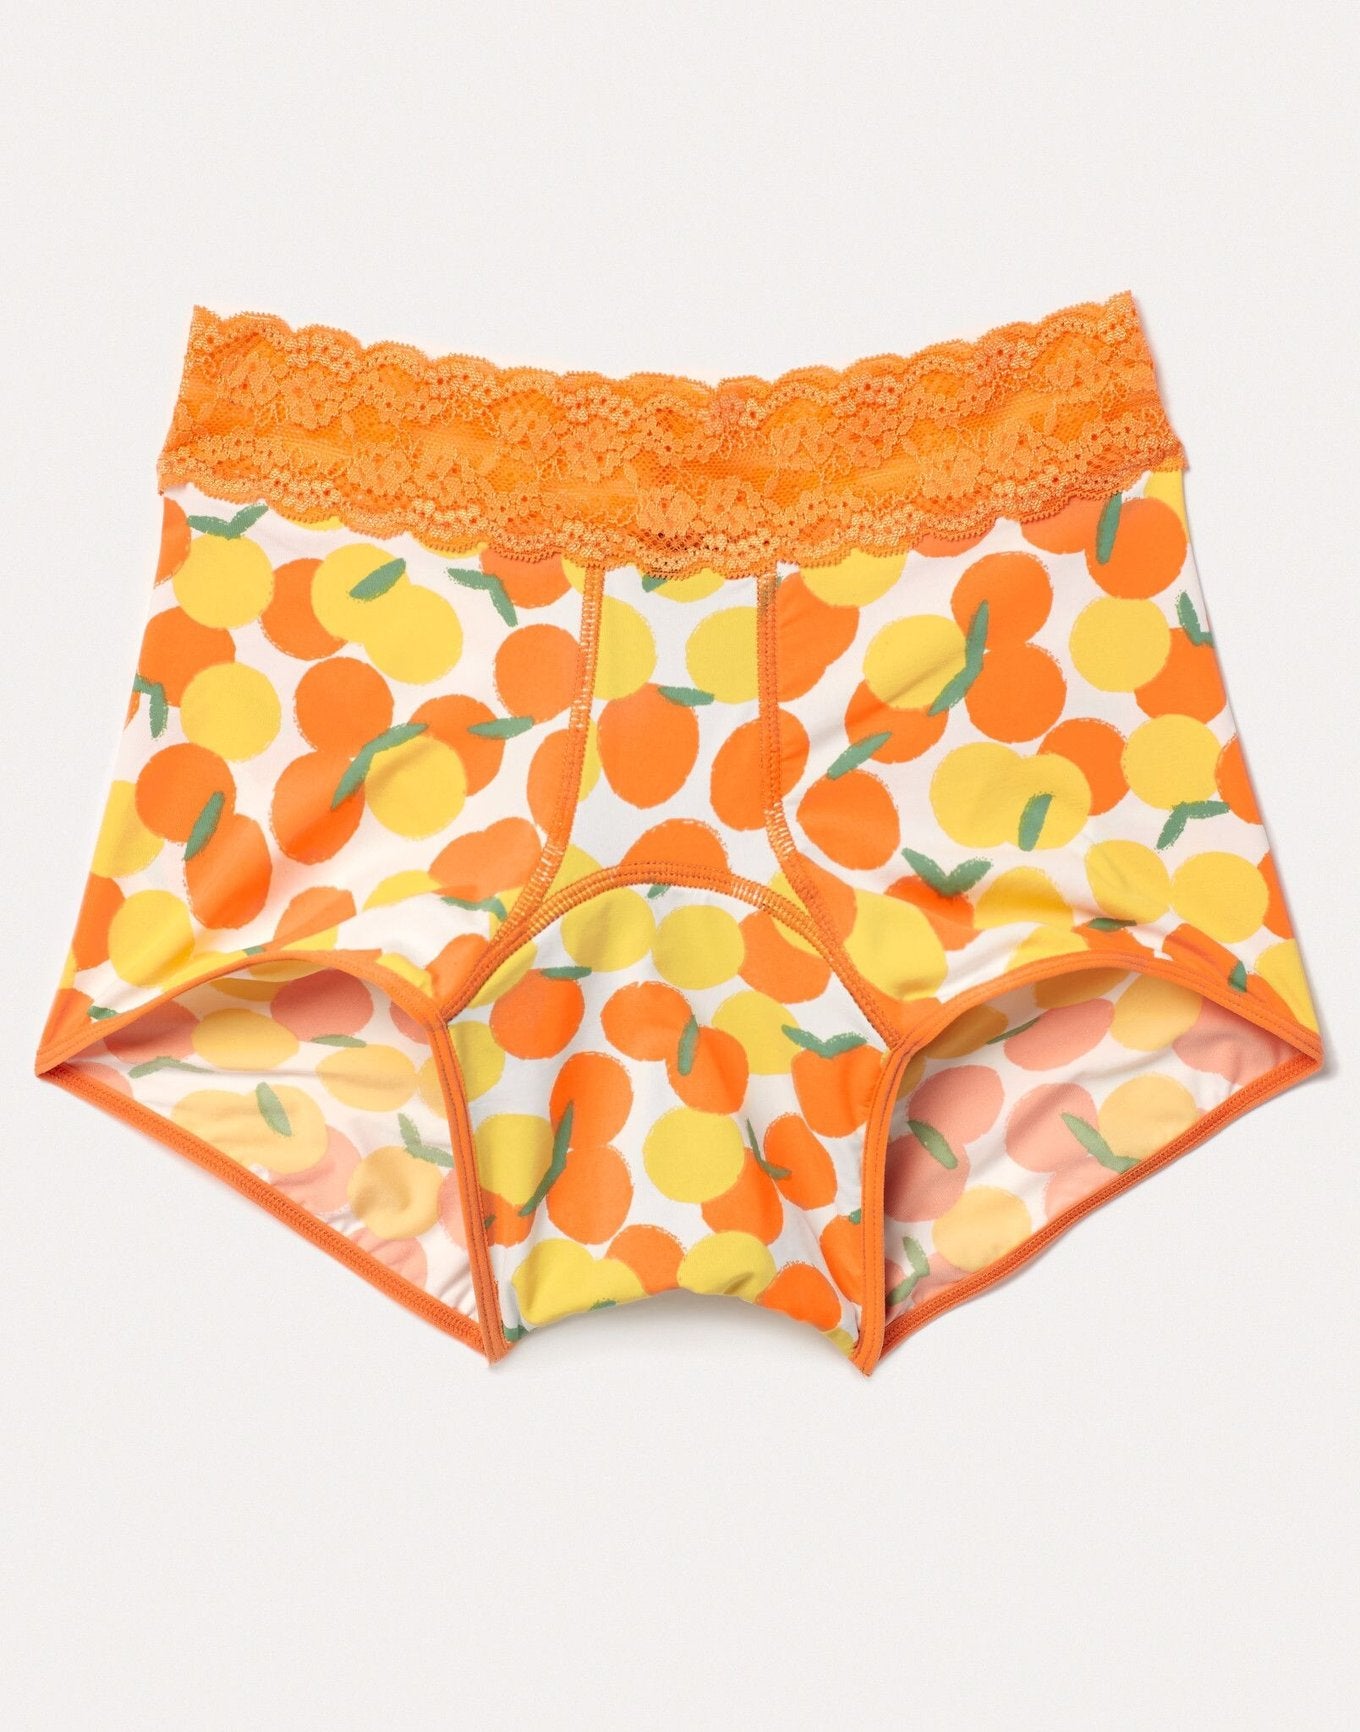 Joyja Emily period-proof panty in color Zest of Life and shape shortie